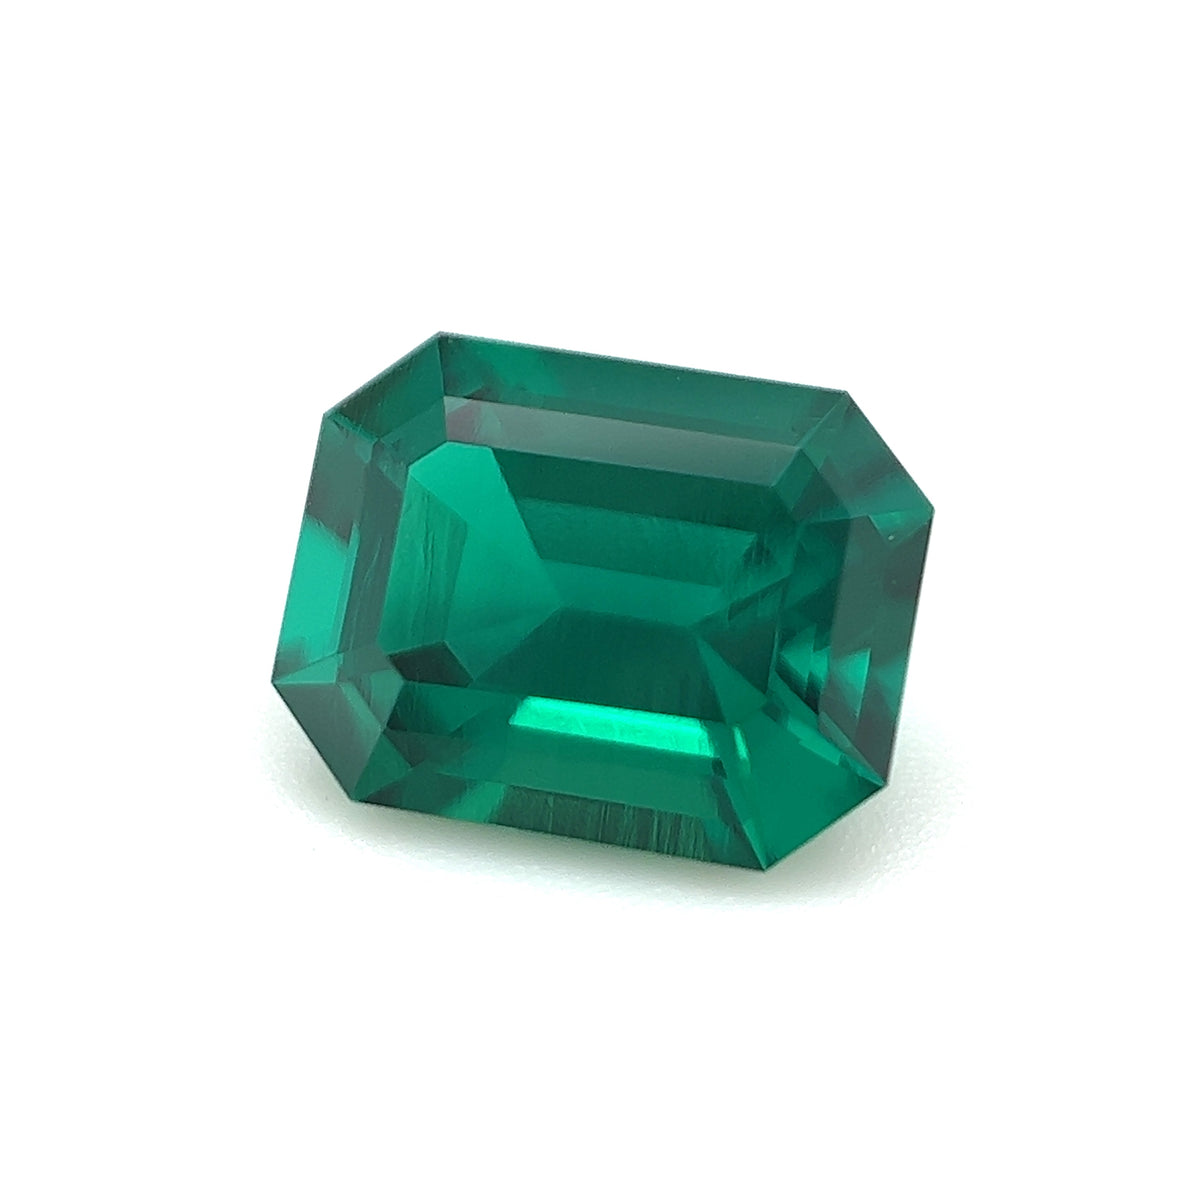 Hydro Thermal Synthetic Emerald